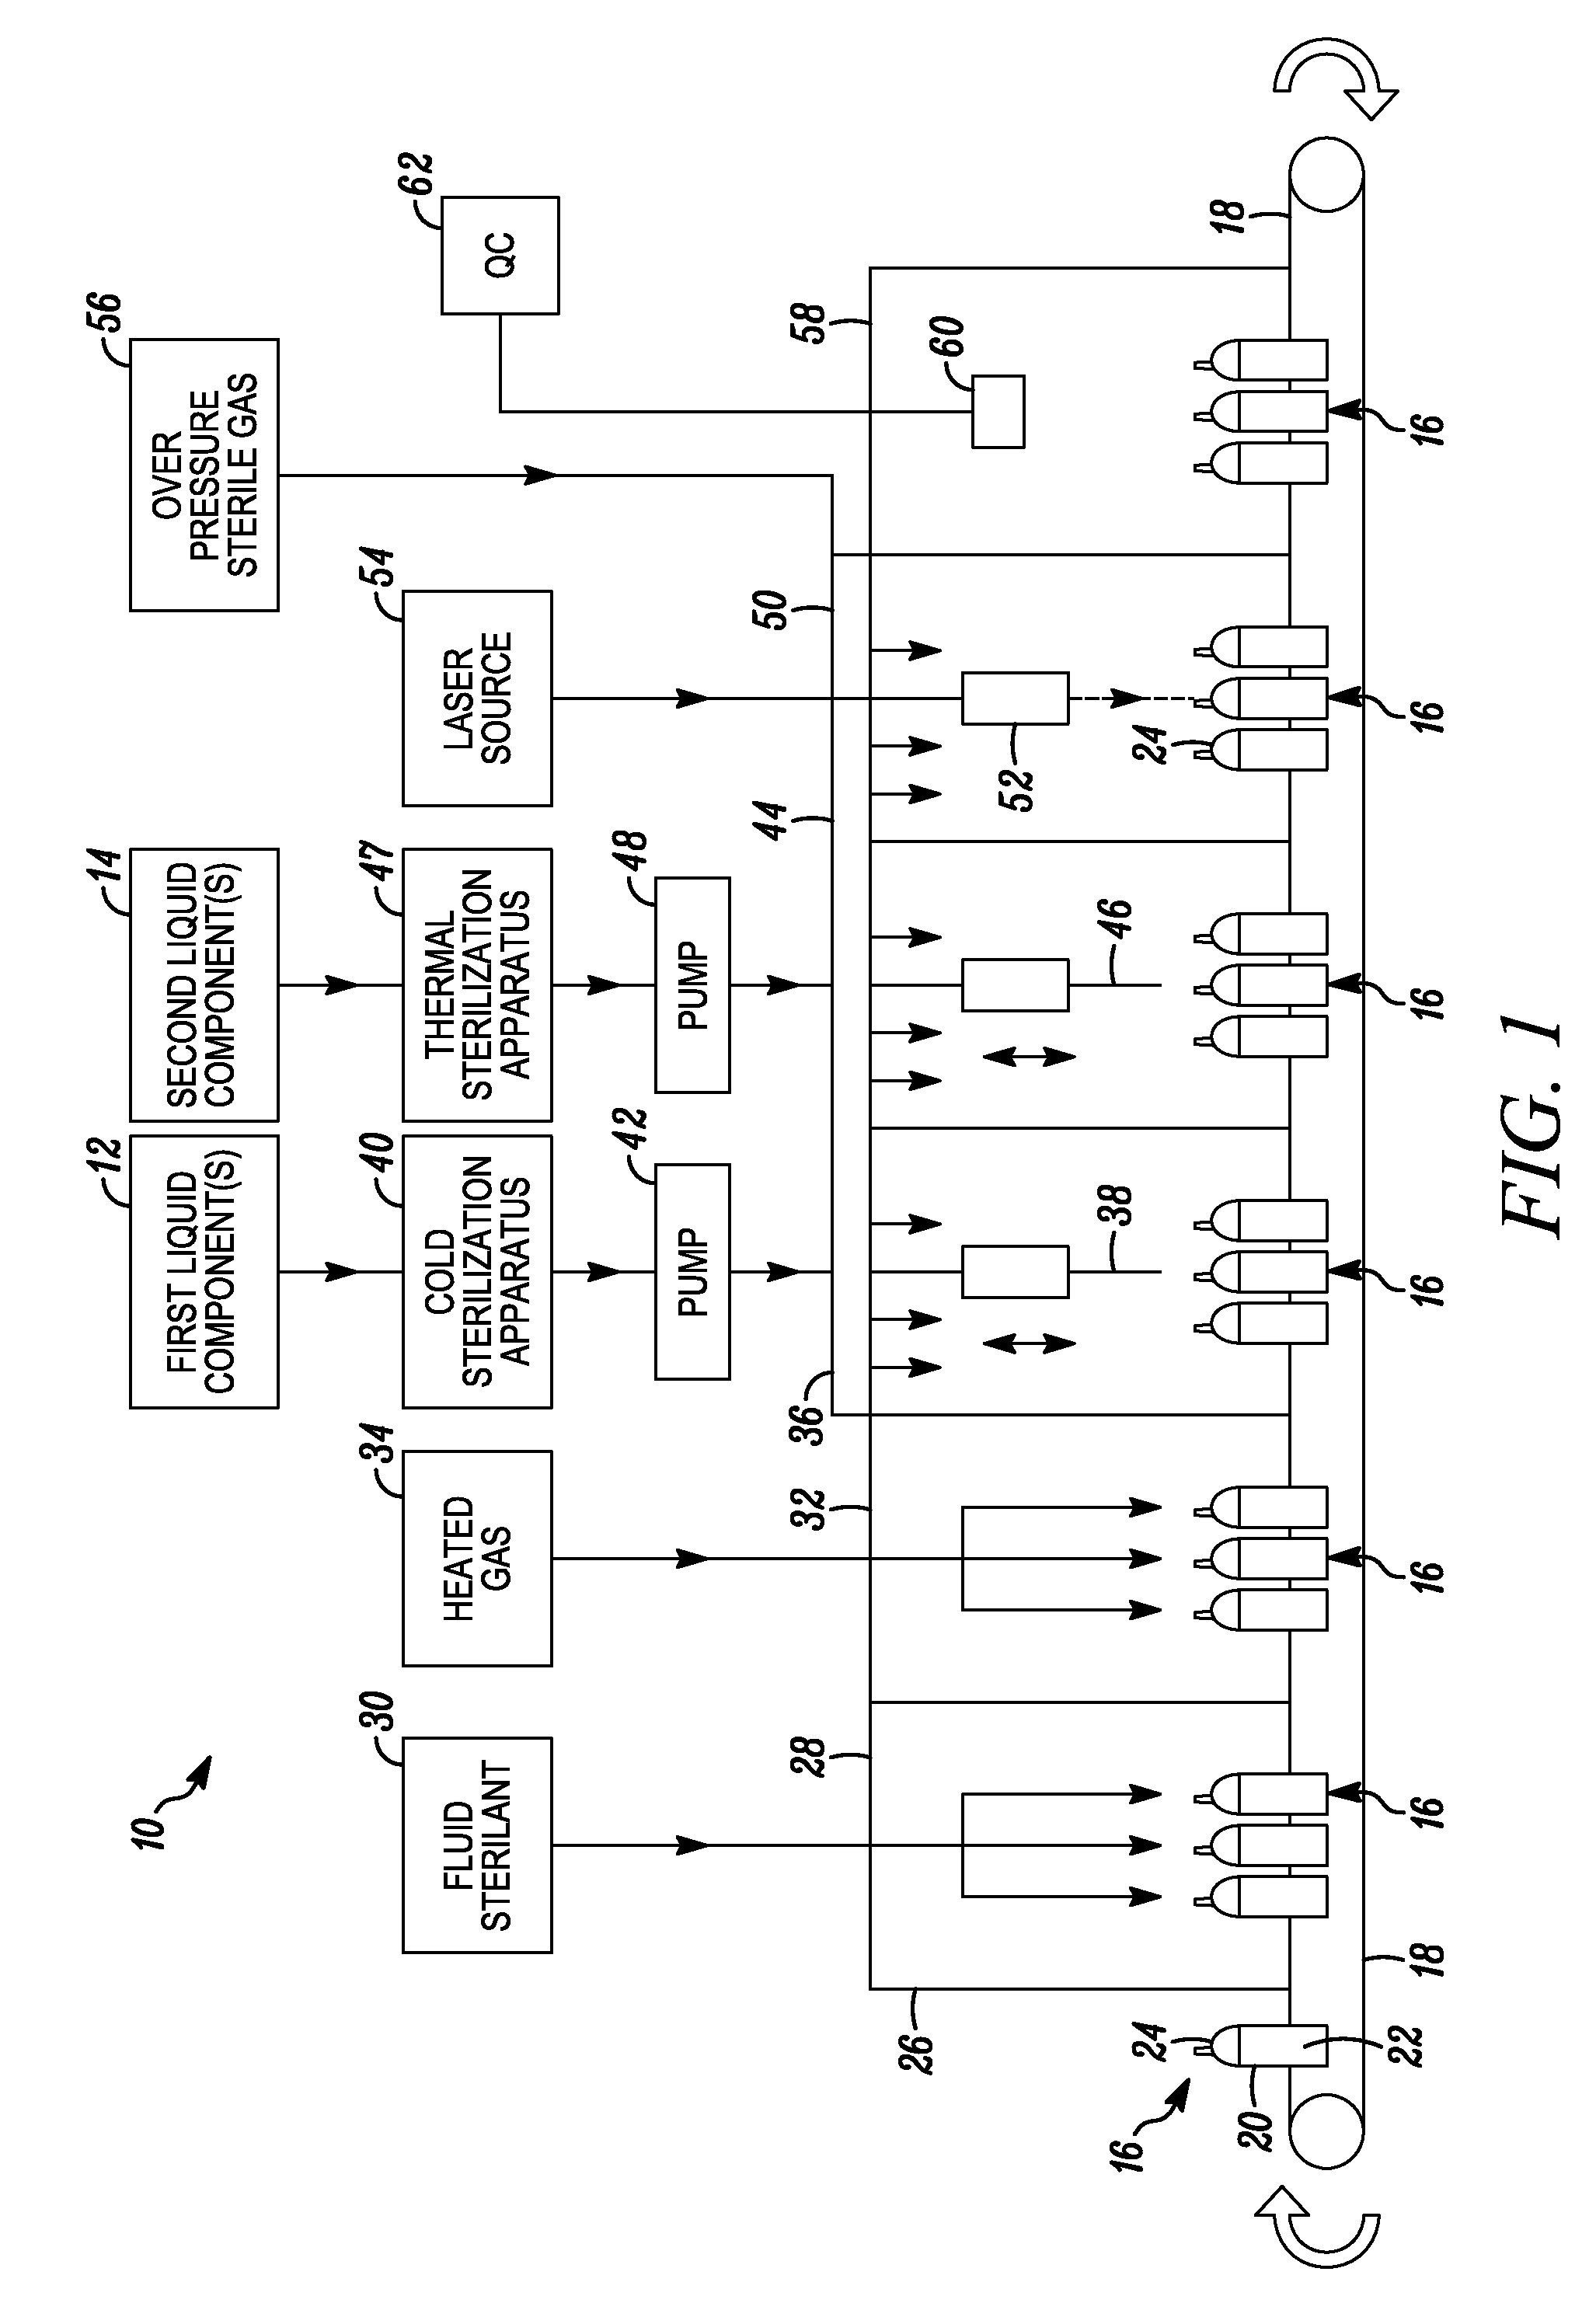 Apparatus for formulating and aseptically filling liquid products